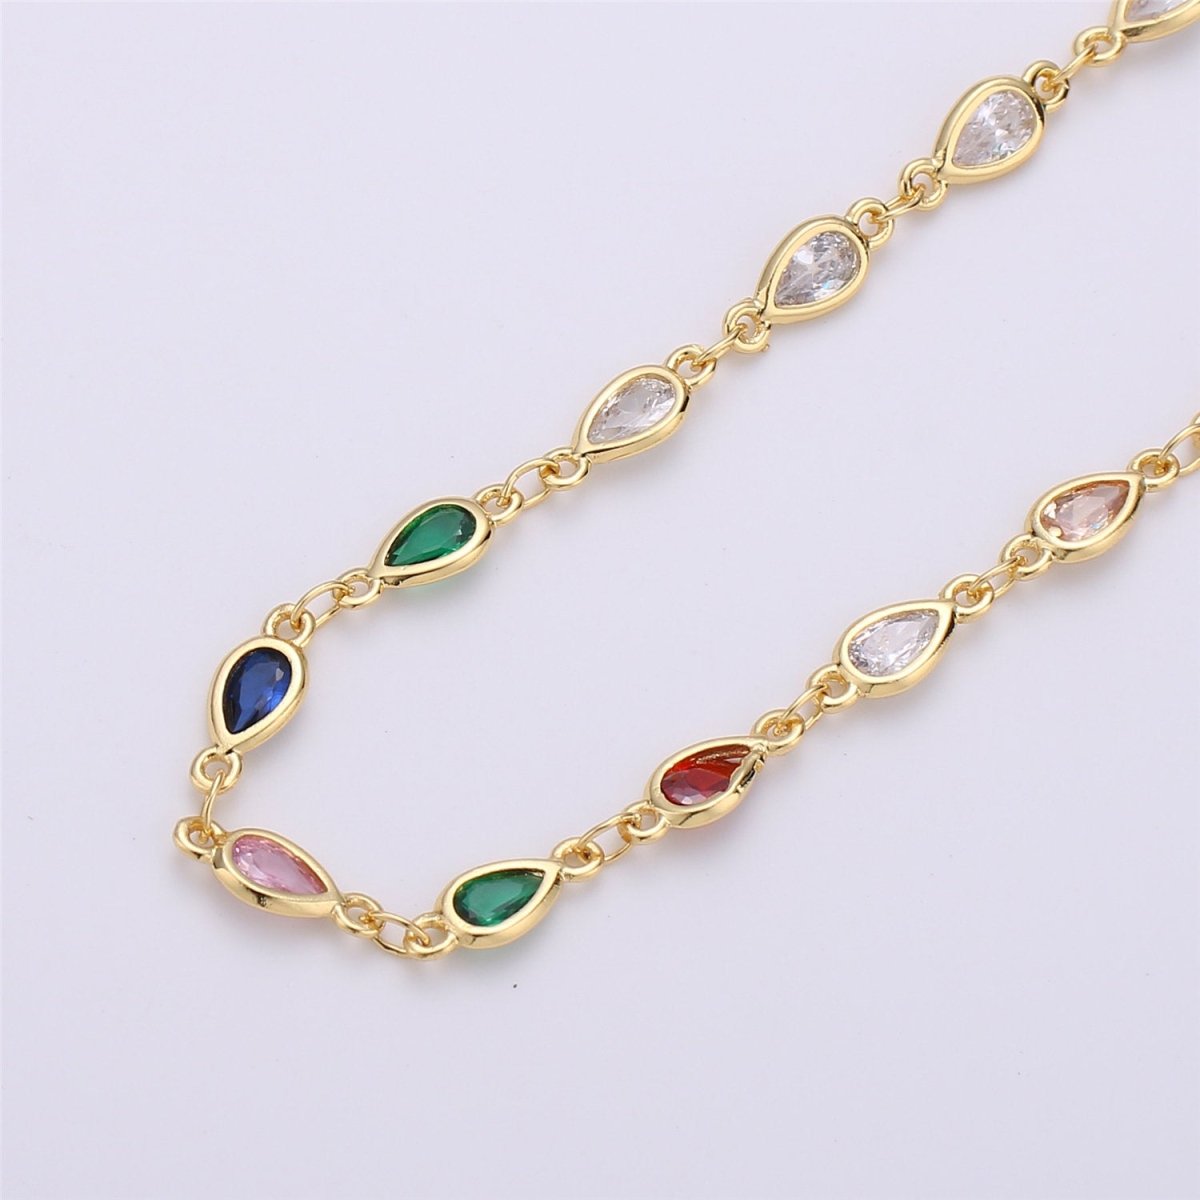 24K Gold Filled Colorful Cubic Zircon Chains, Tear Drop Bezel Chains Silver 1 Yard 6x4mm CZ Connectors Links for Rosary Necklace Supply, White Gold Filled, DESIGNED Chain | ROLL-115 ROLL-116 Clearance Pricing - DLUXCA